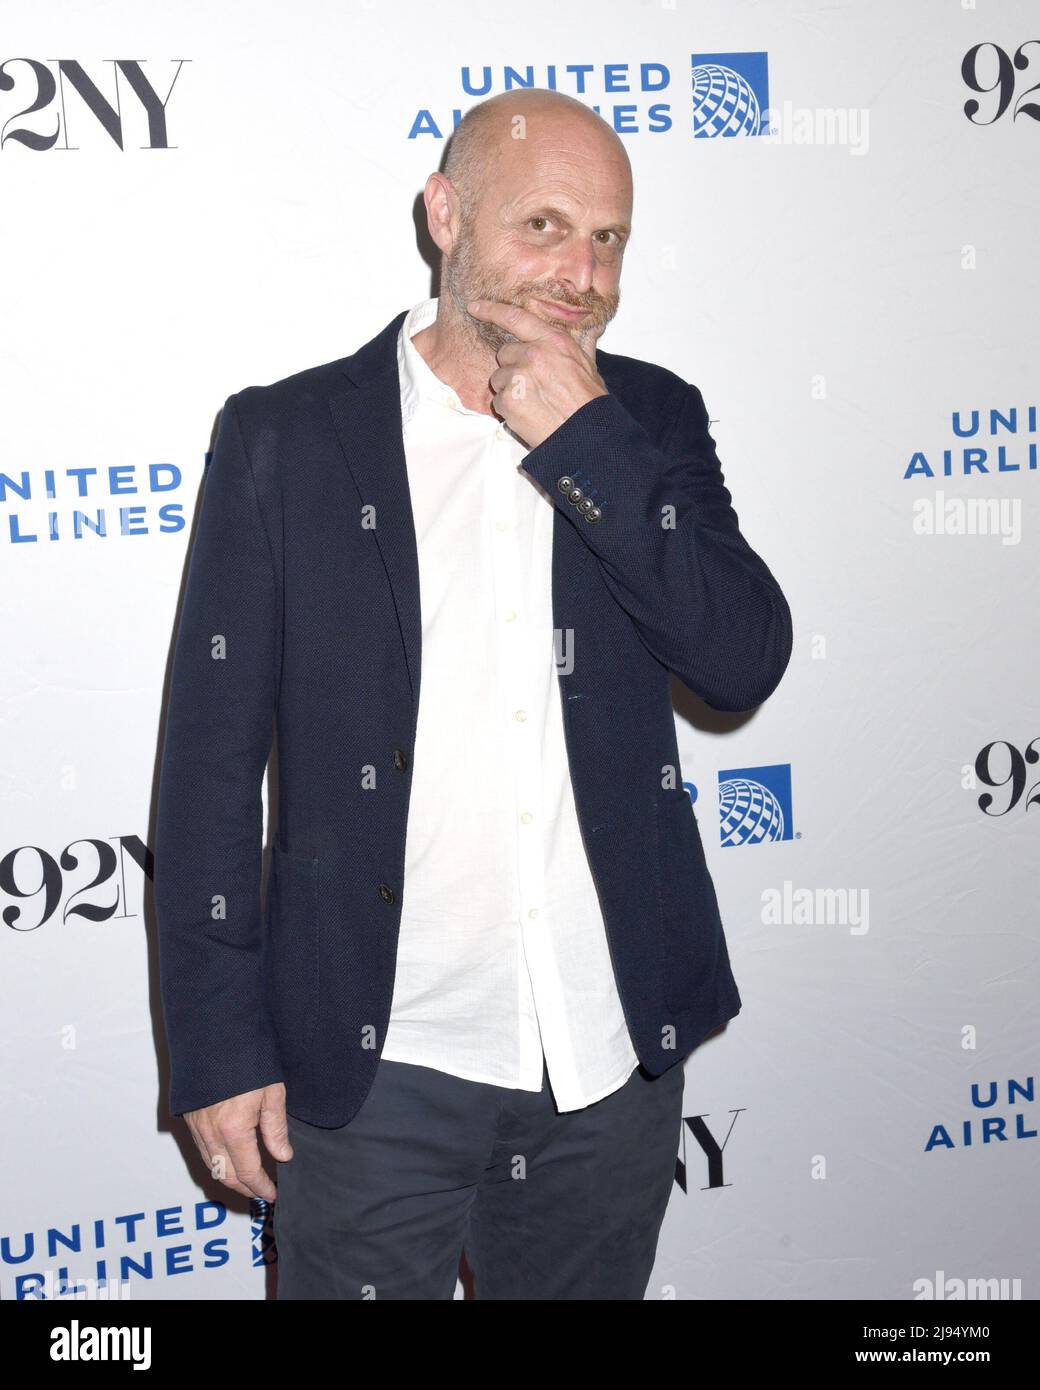 New York, NY, USA. 19th May, 2022. Hagai Levi in attendance for HBO's SCENES FROM A MARRIAGE at 92Y, The 92nd Street Y, New York, NY May 19, 2022. Credit: Quoin Pics/Everett Collection/Alamy Live News Stock Photo